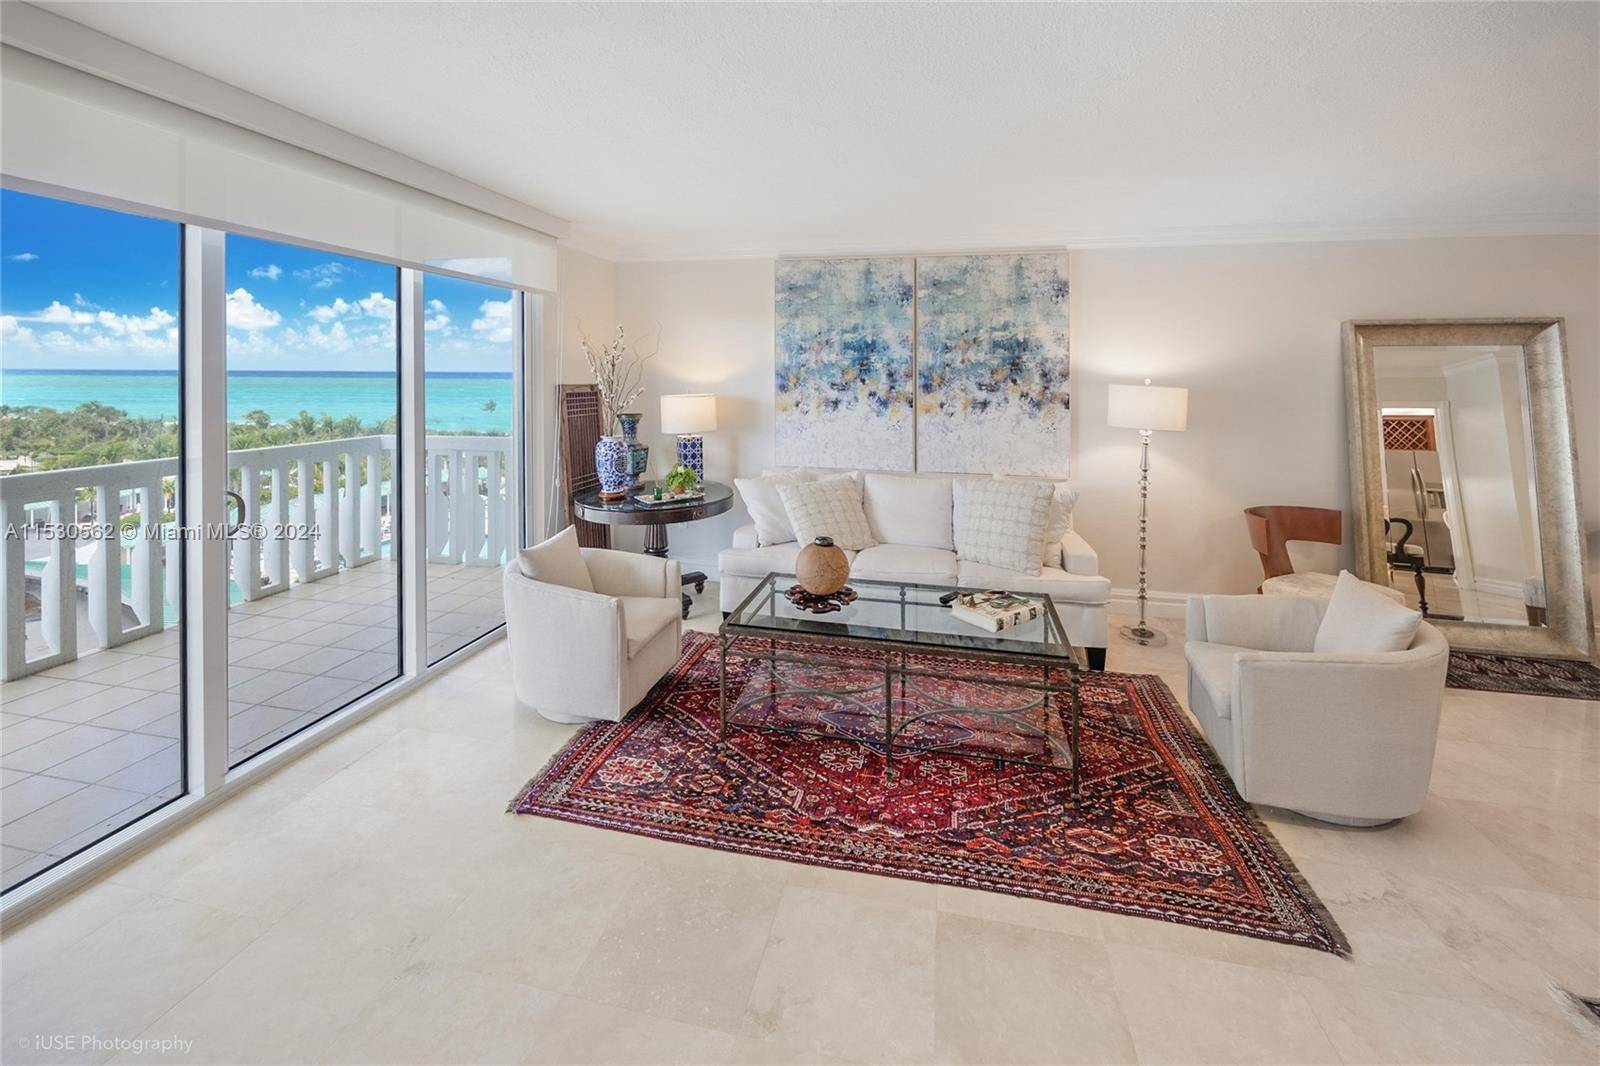 The Balmoral Residences in Bal Harbour, Florida, unit 8 G.